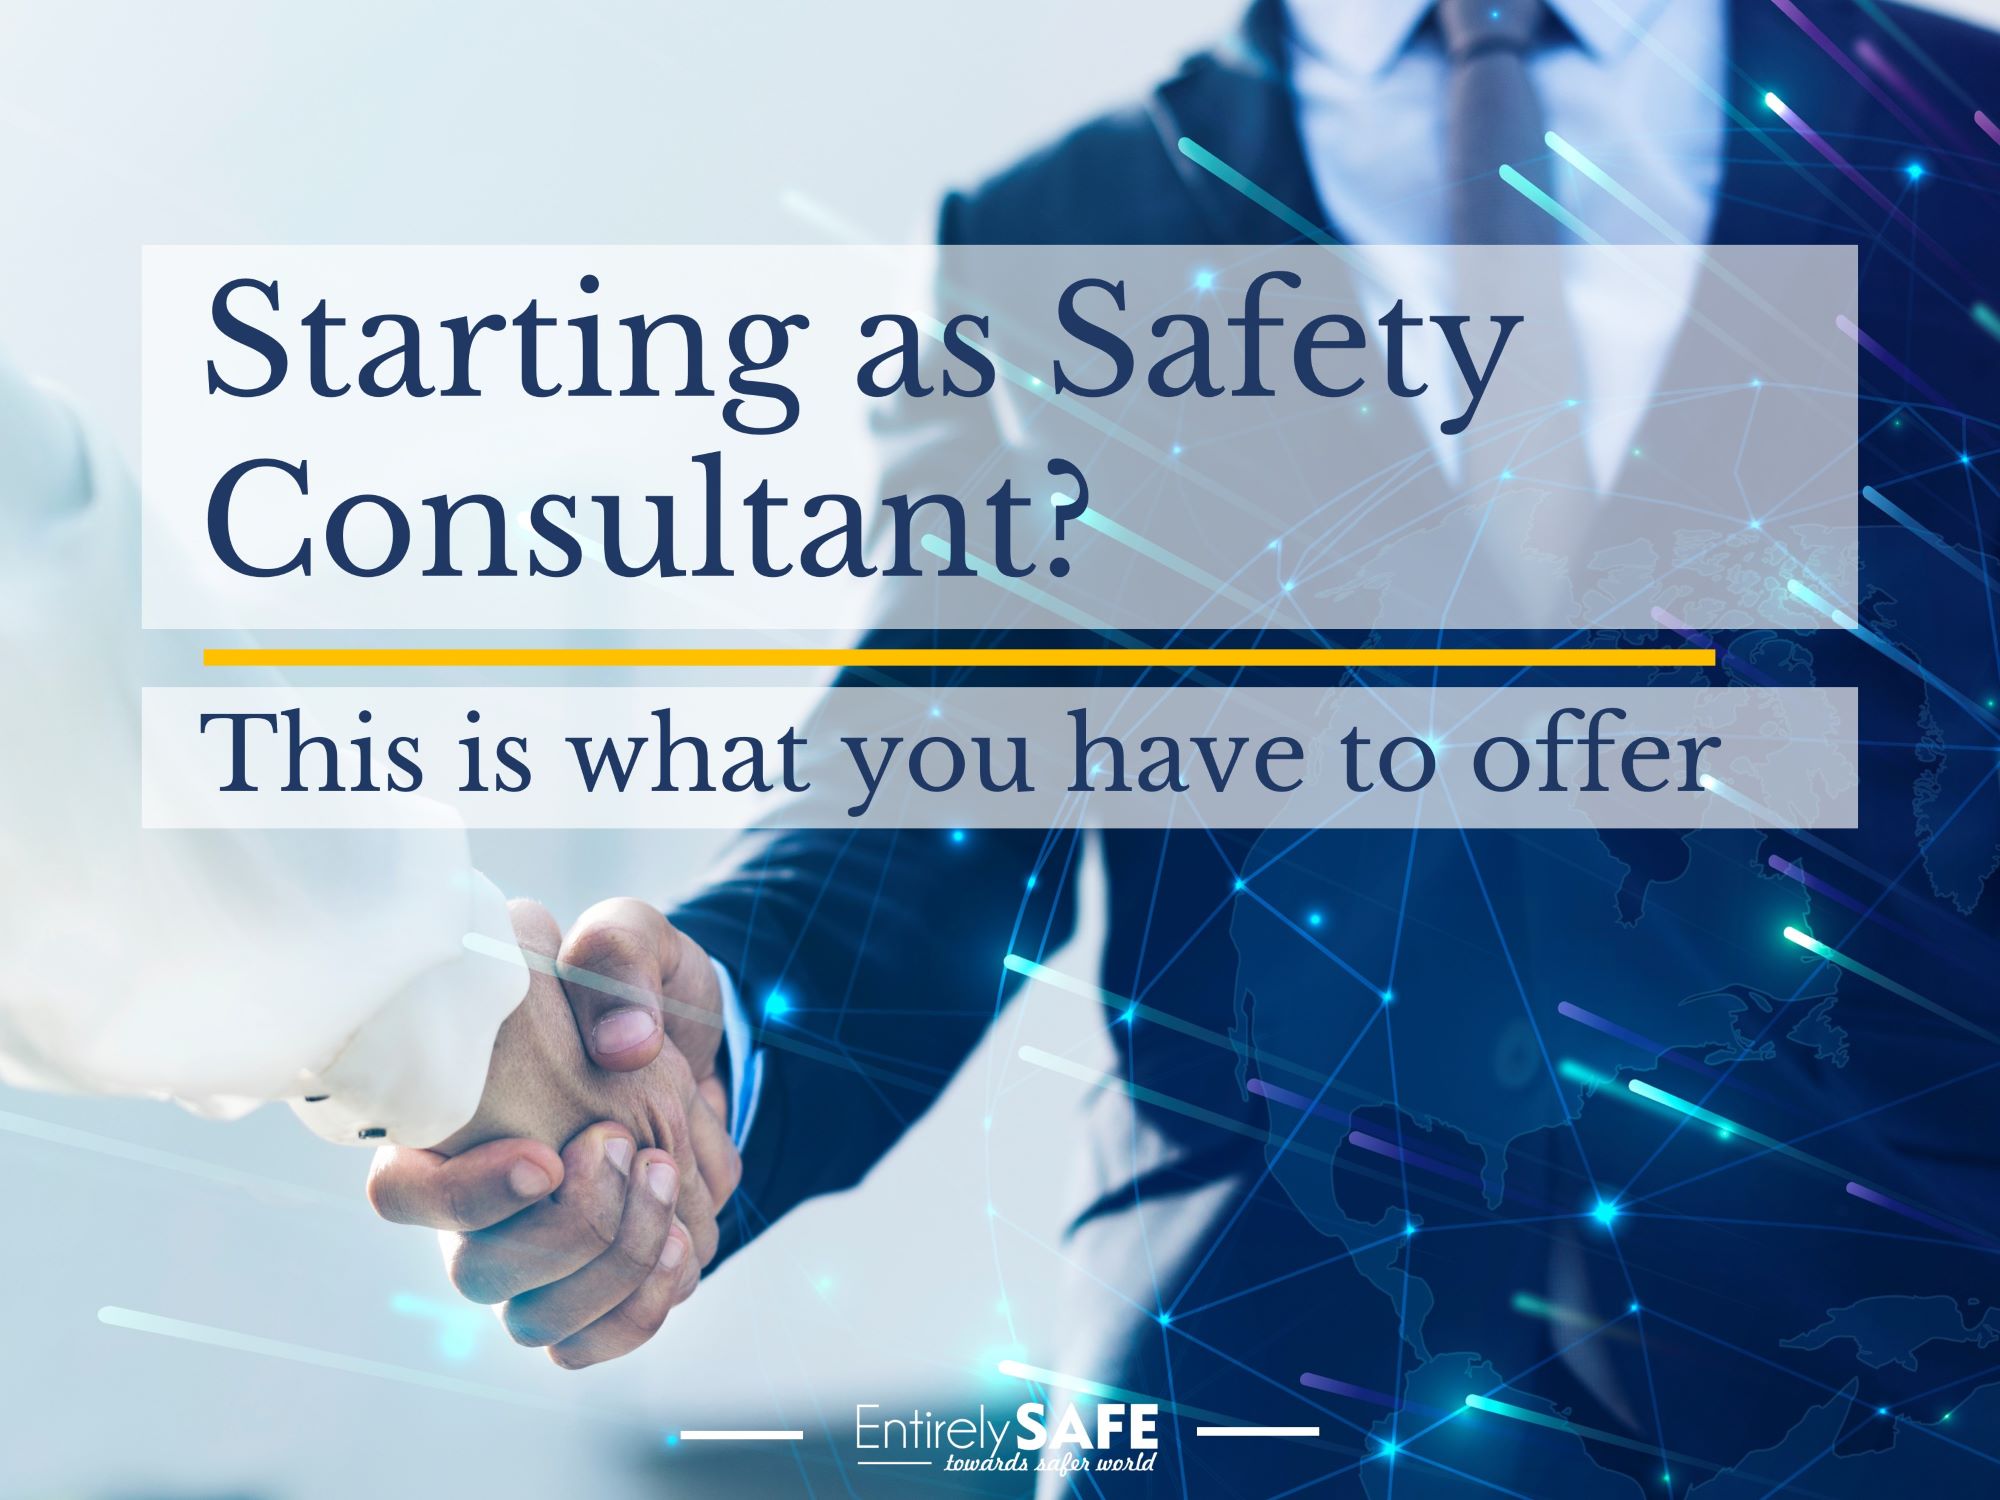 Need a side hussle, Services you can offer as a Safety Consultant